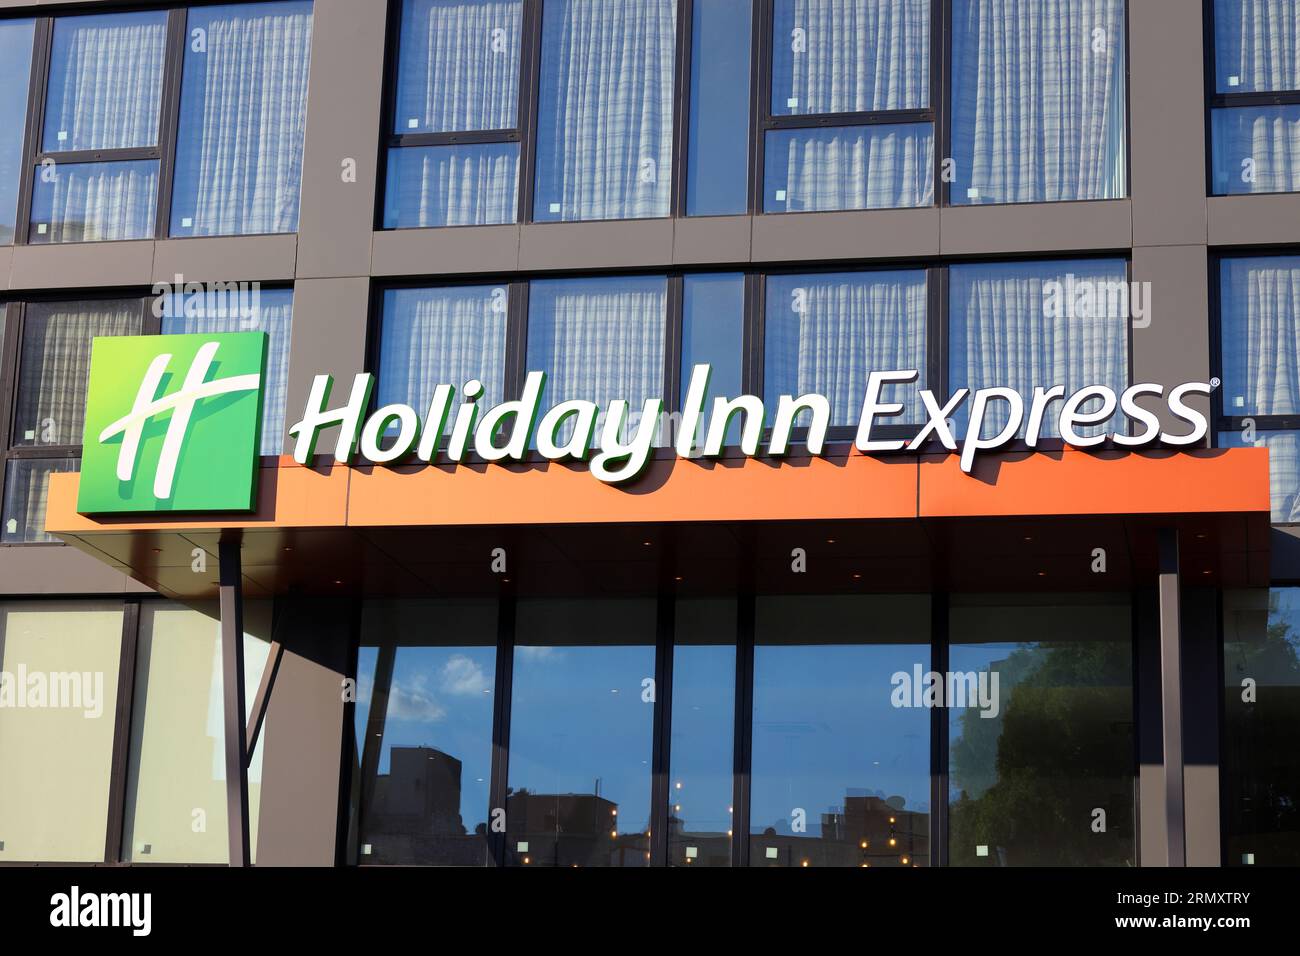 Signage for Hotel Inn Express chain of budget hotels. Stock Photo